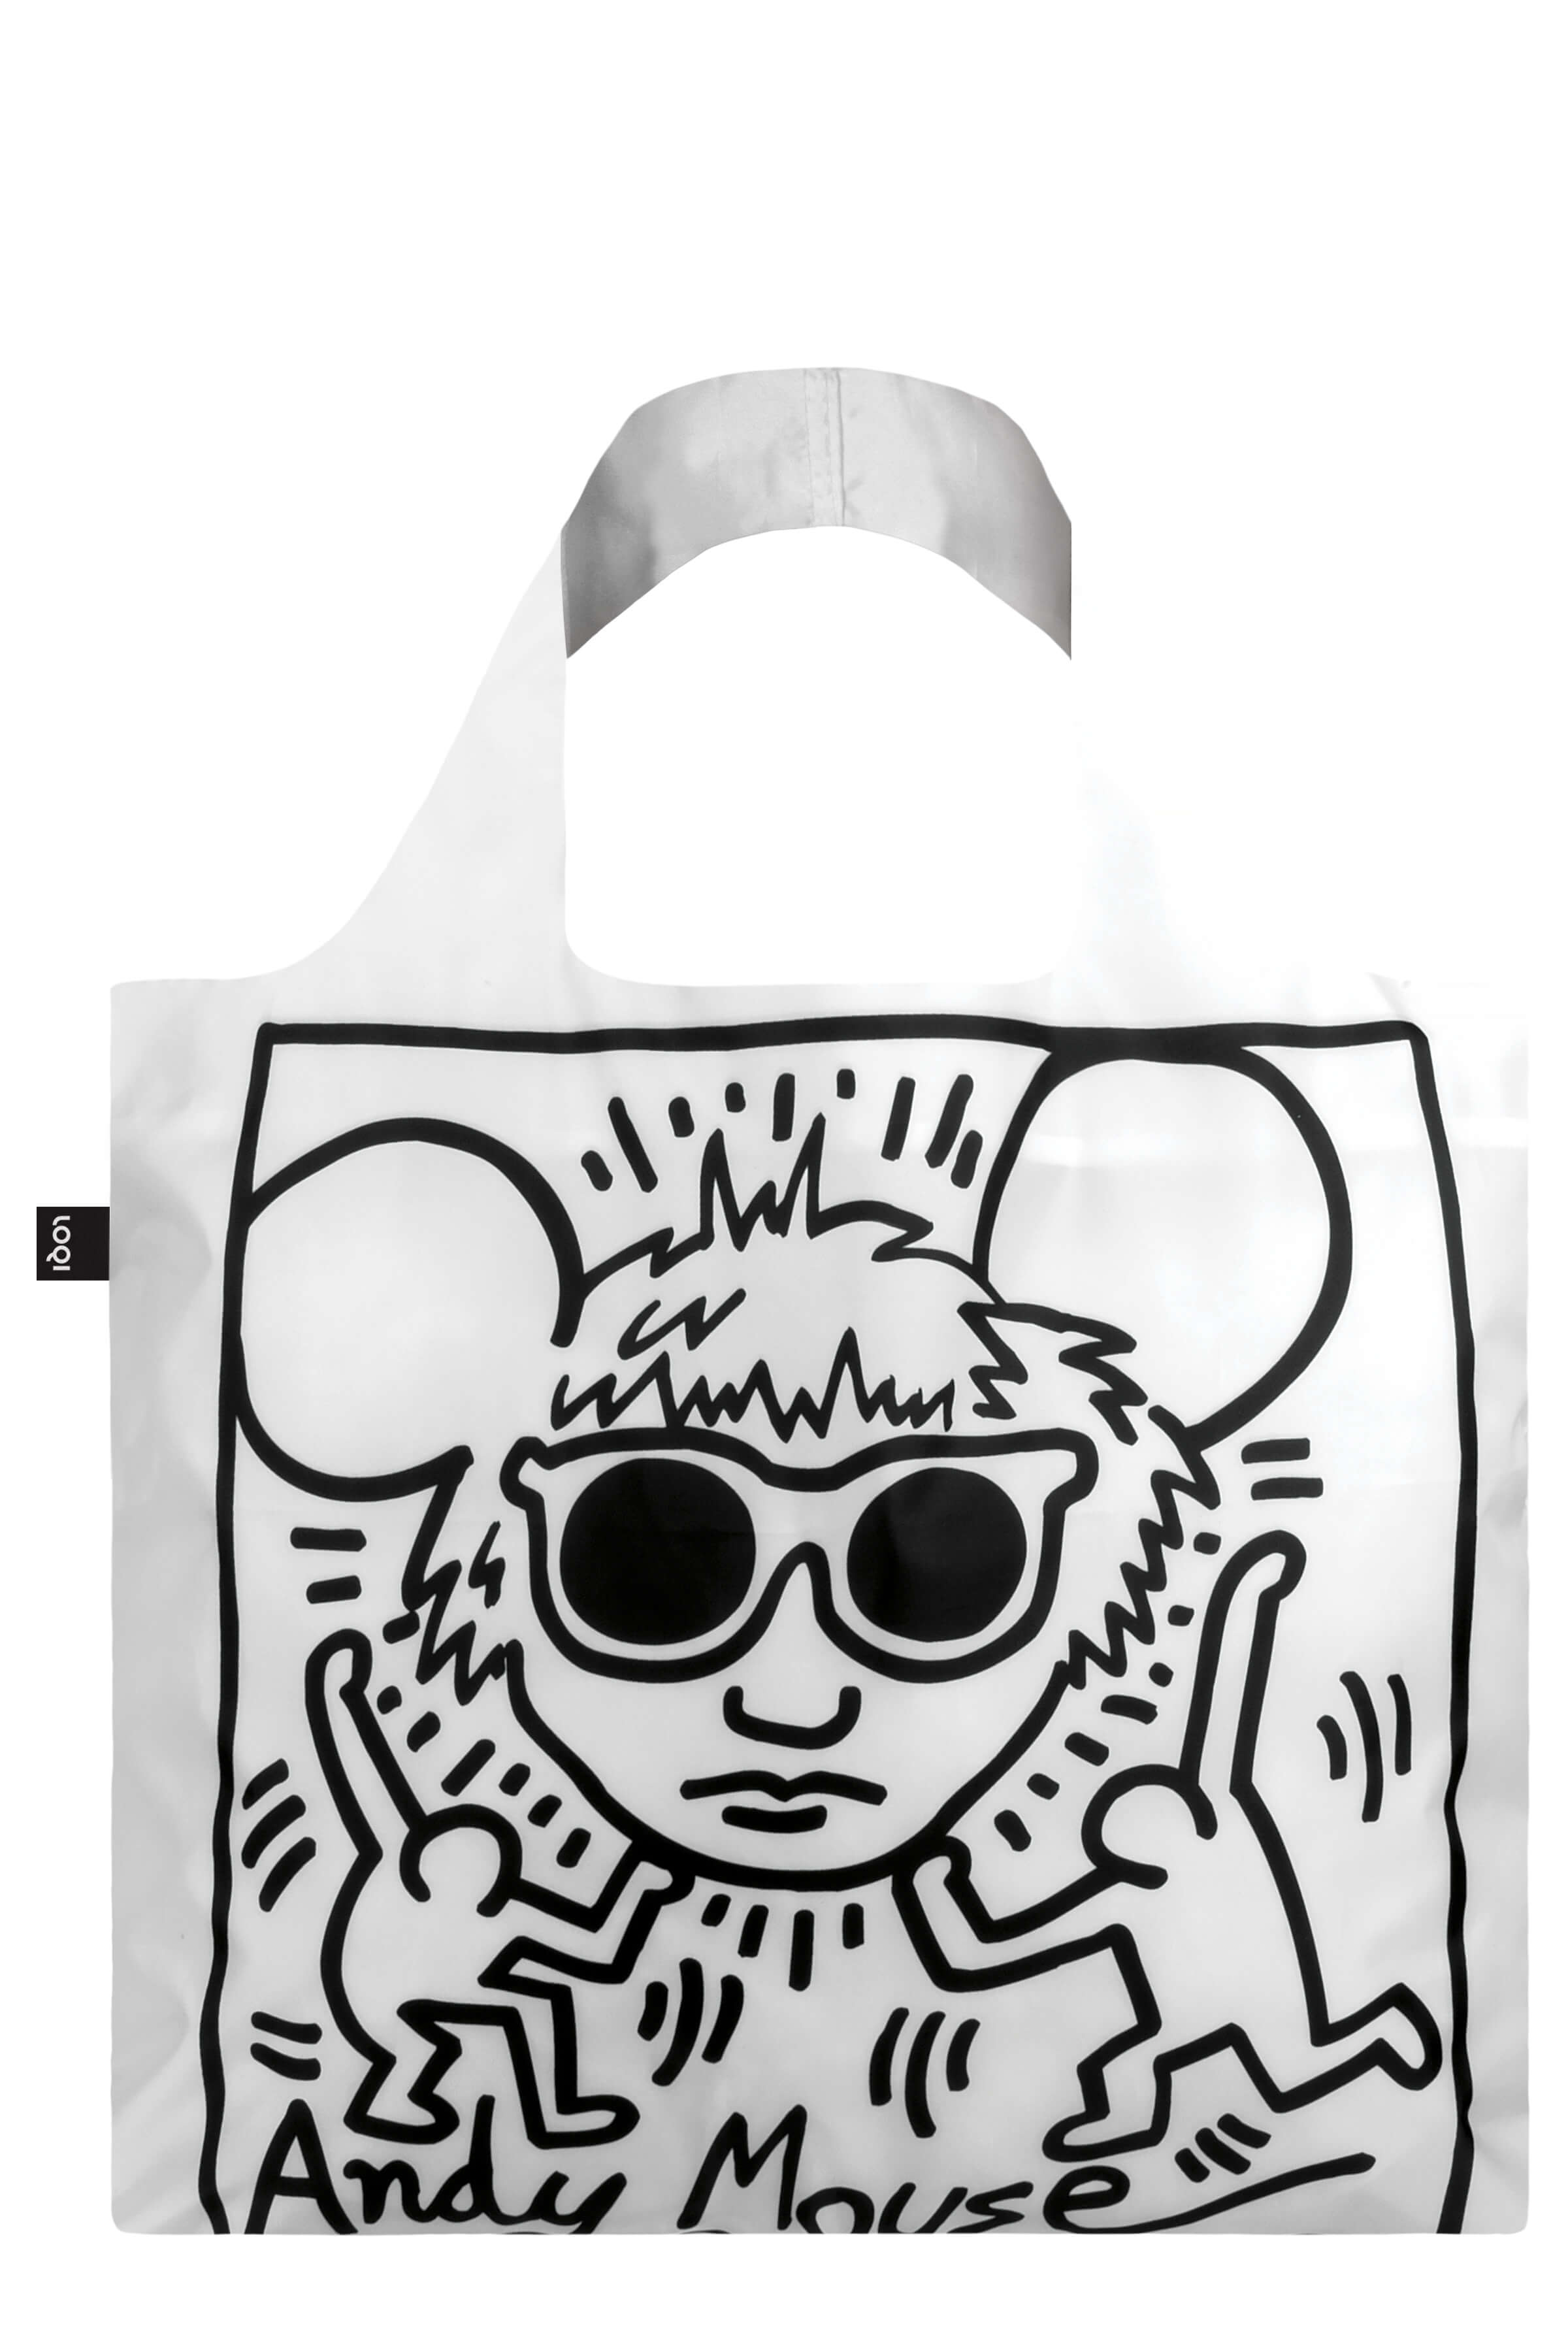 Andy Mouse - Sac shopping Loqi 